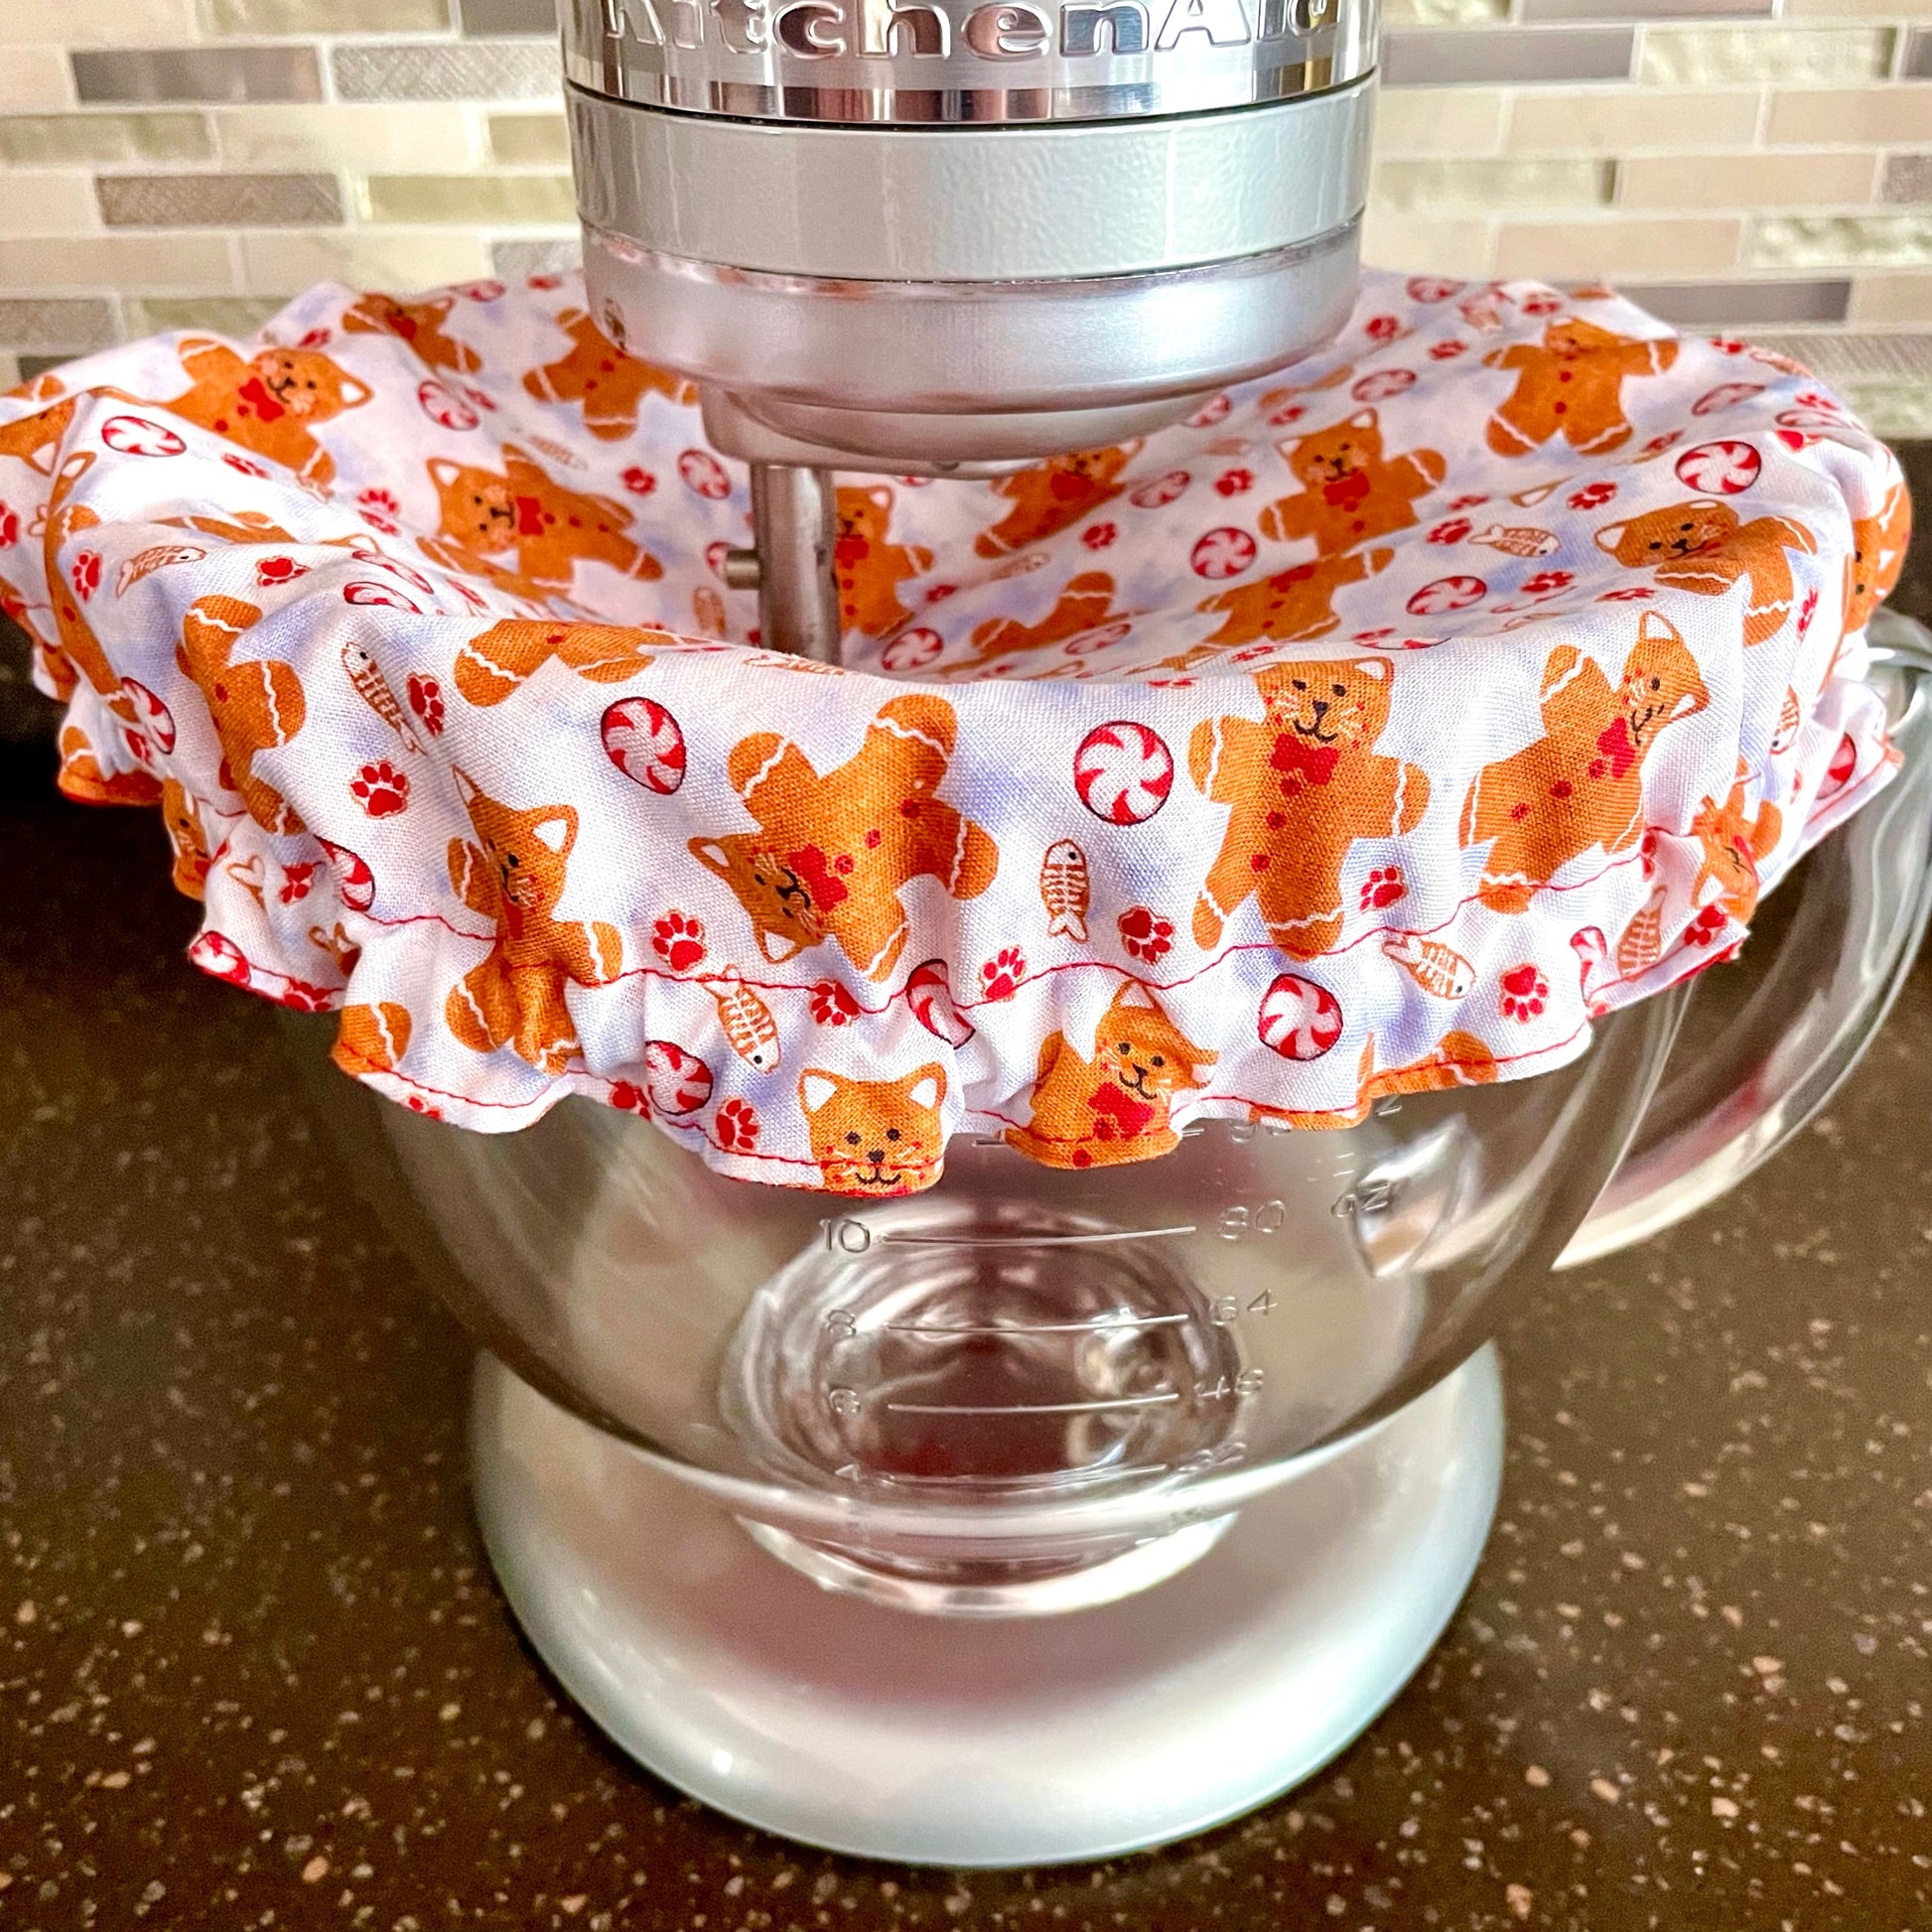 Kitchenaid Artisan 5-Qt. Stand Mixer Dust Cover (With Bowl)